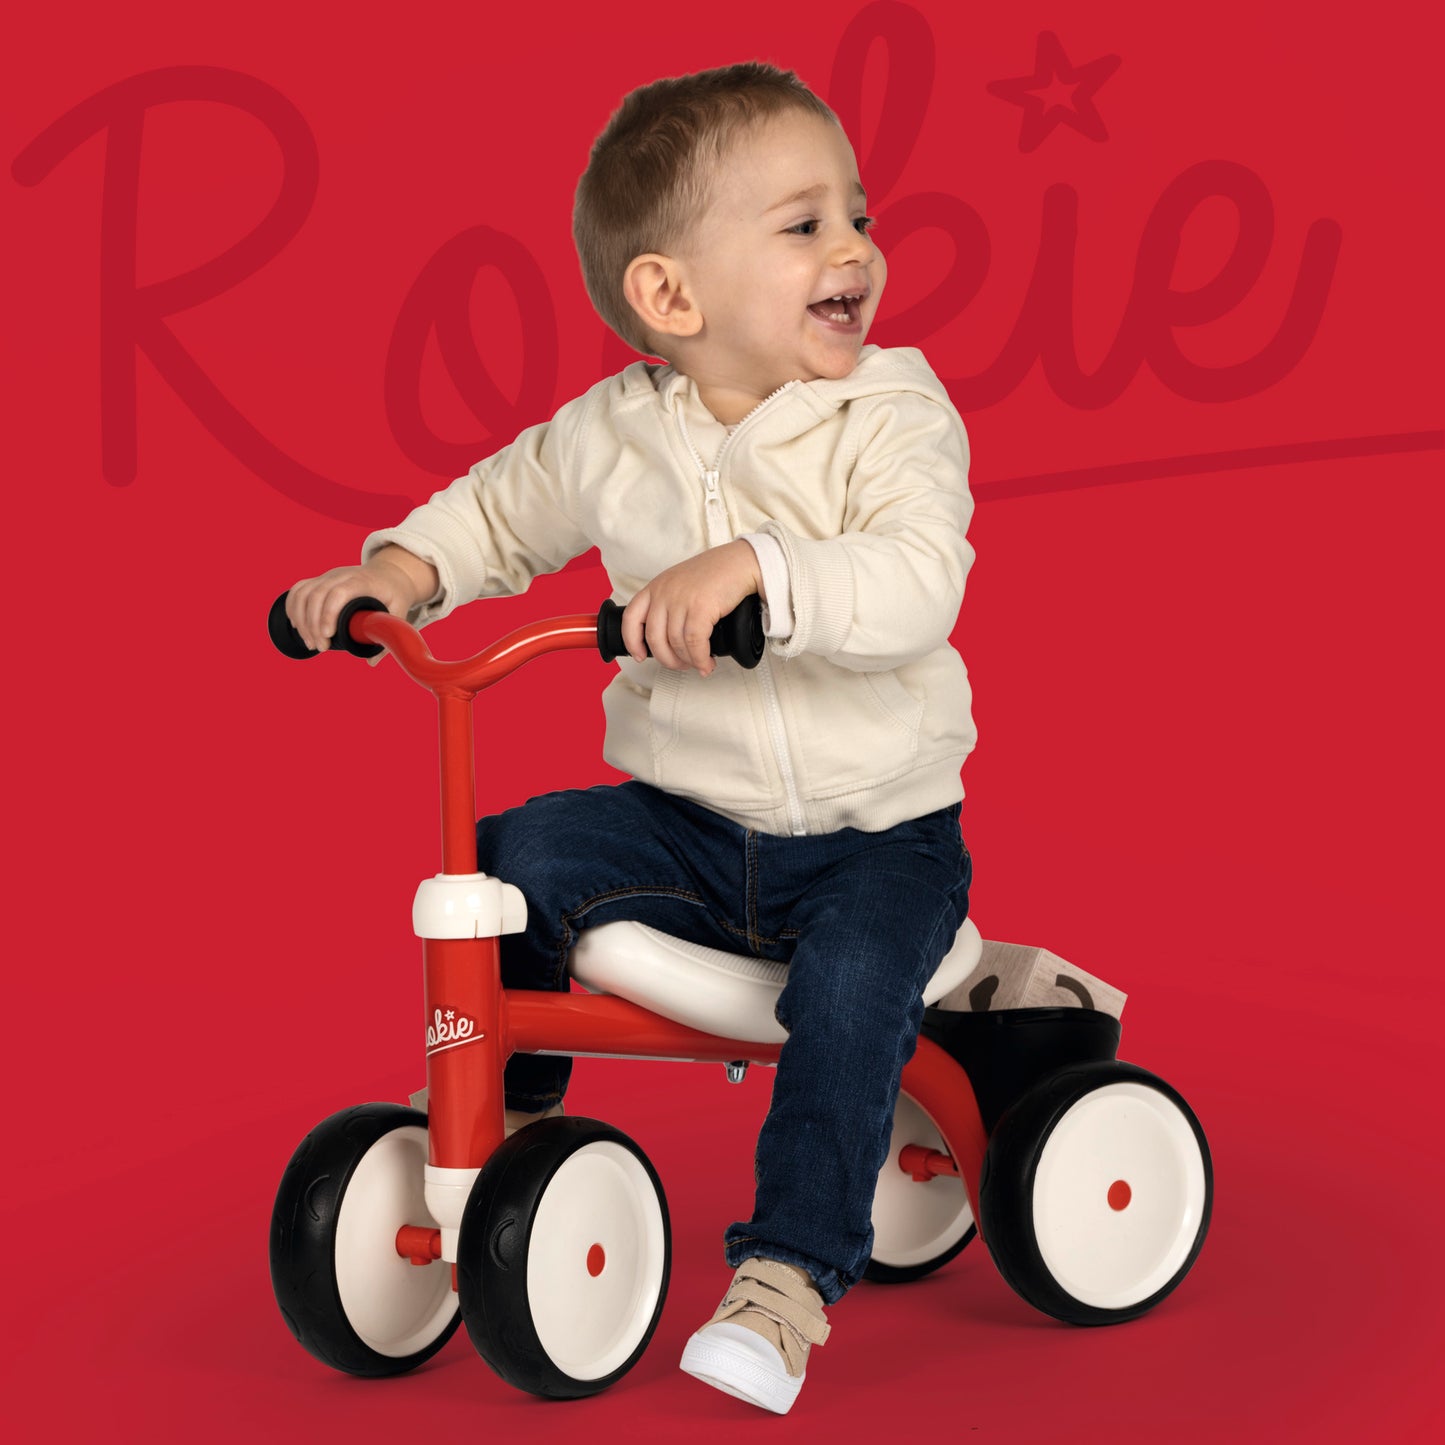 Smoby Rookie Ride-On - 12 Months +